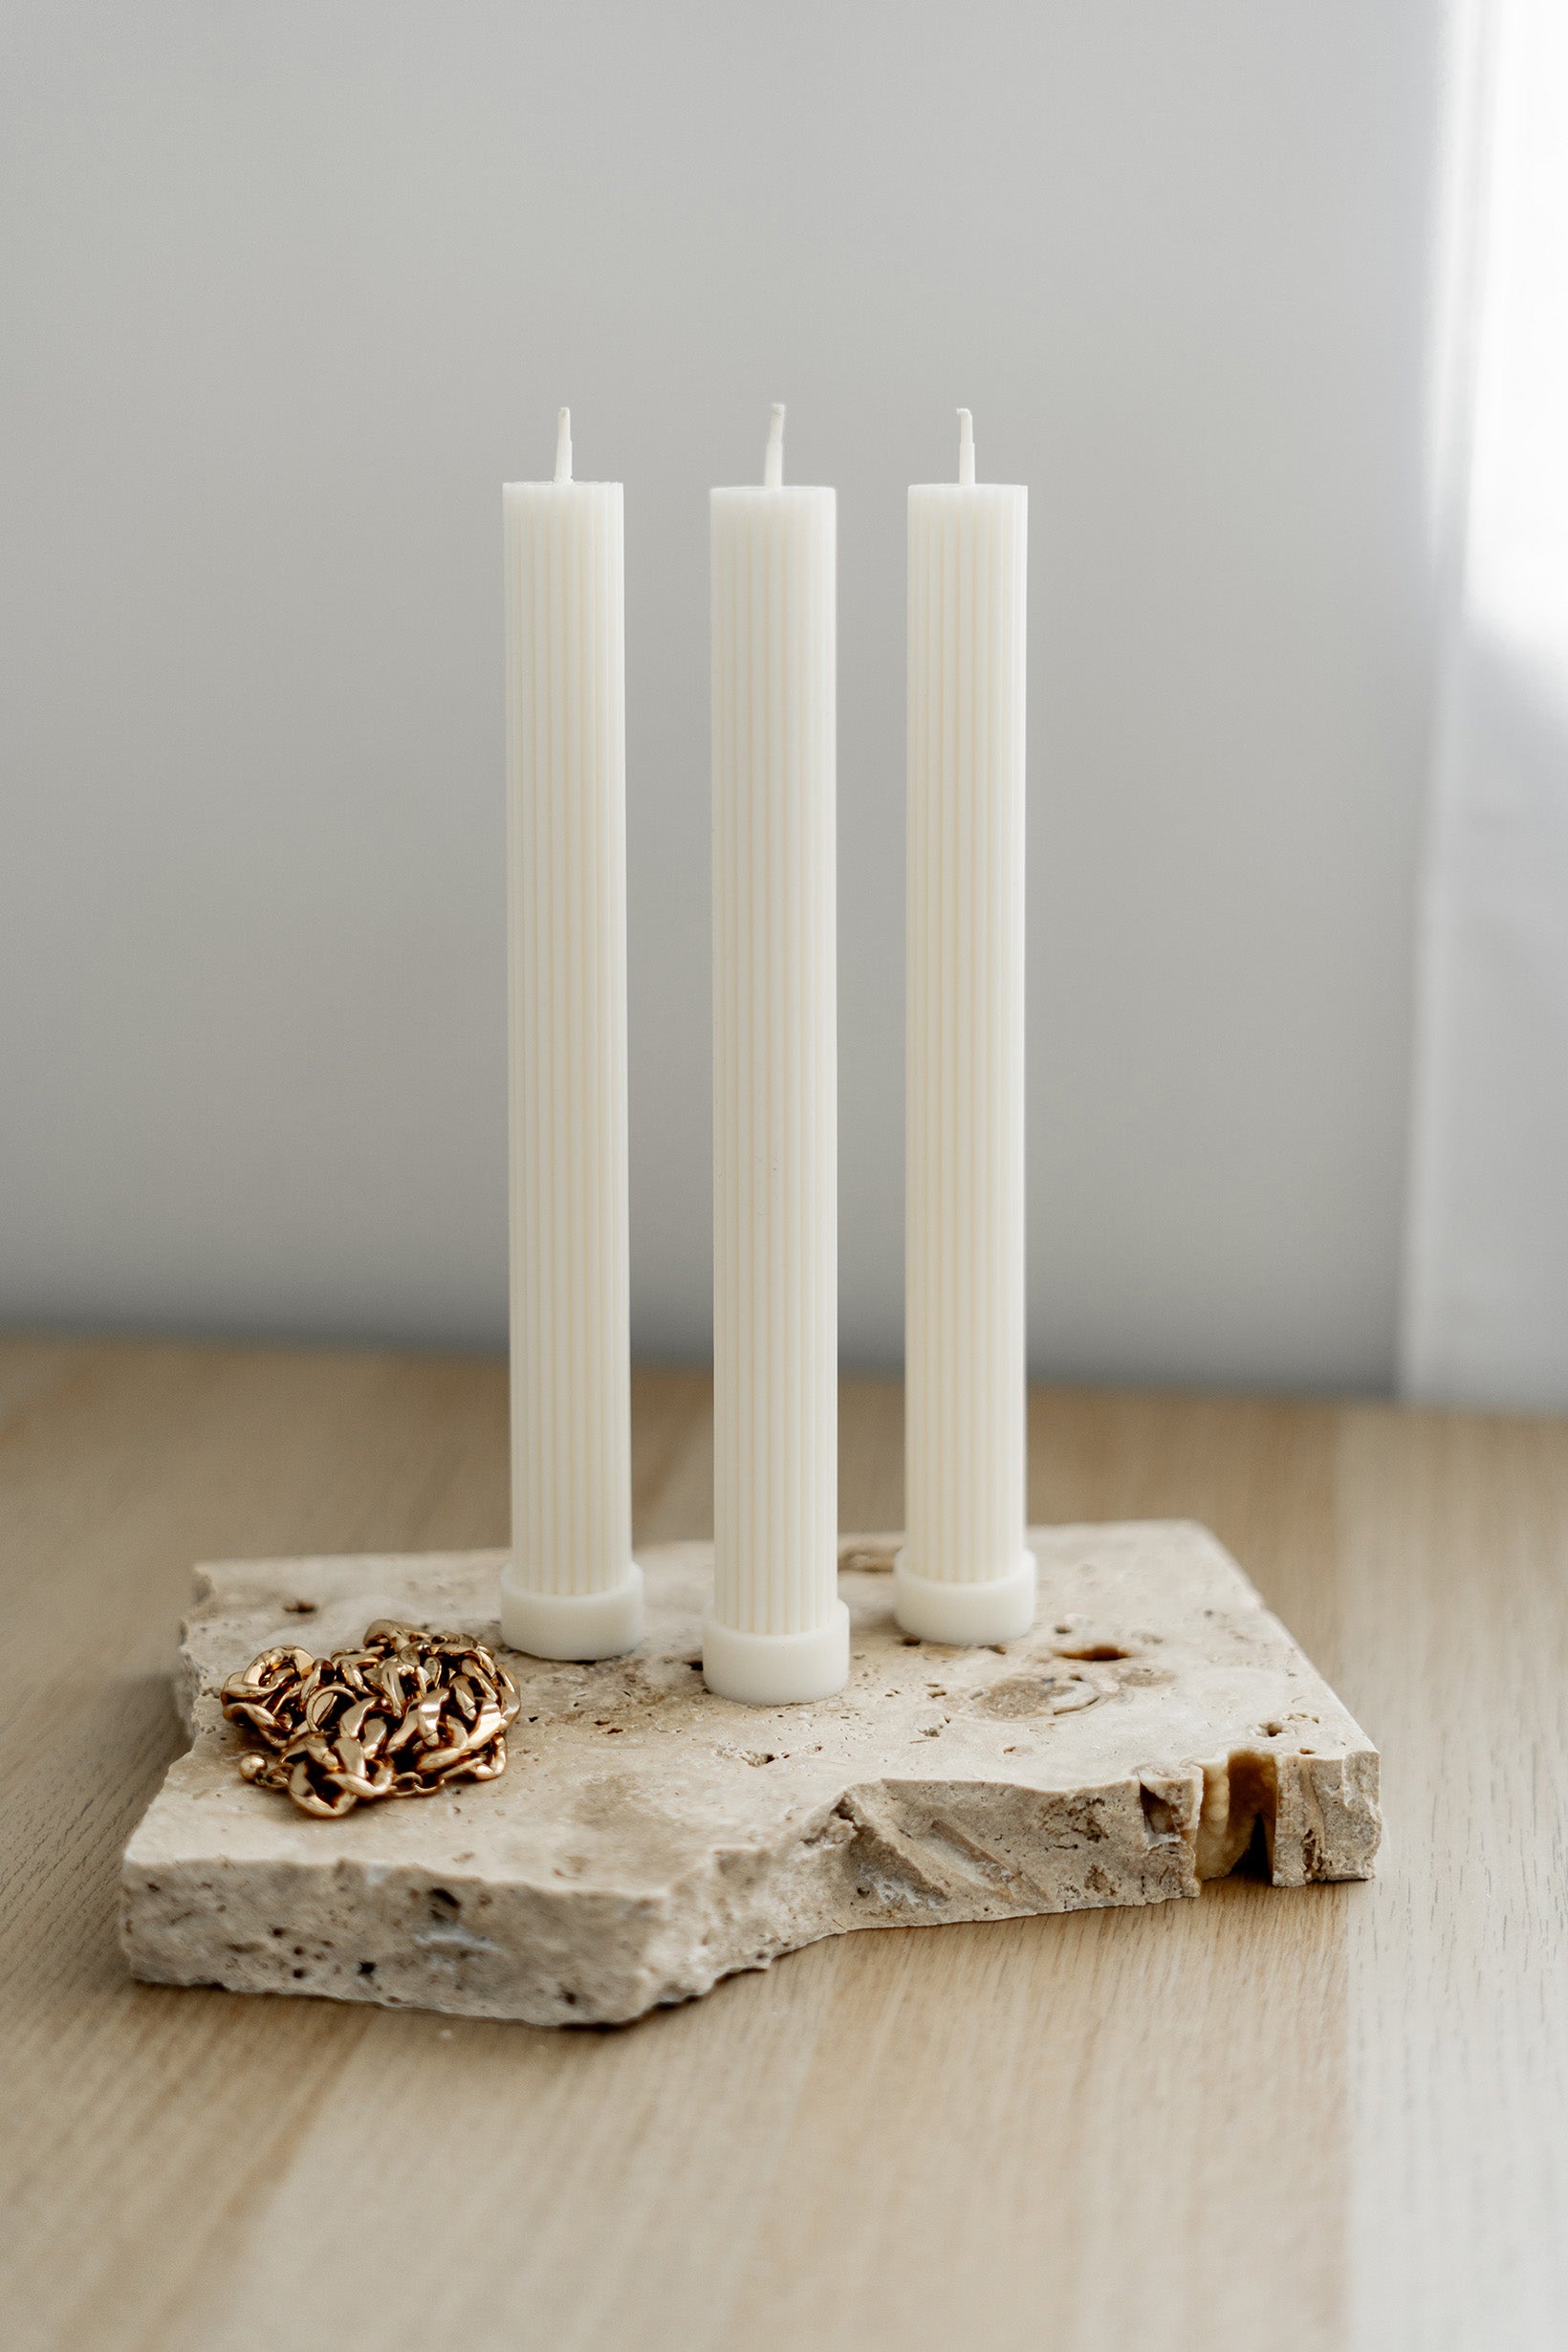 Cotton Wicks for Pillar Candles – Myka Candles & Moulds